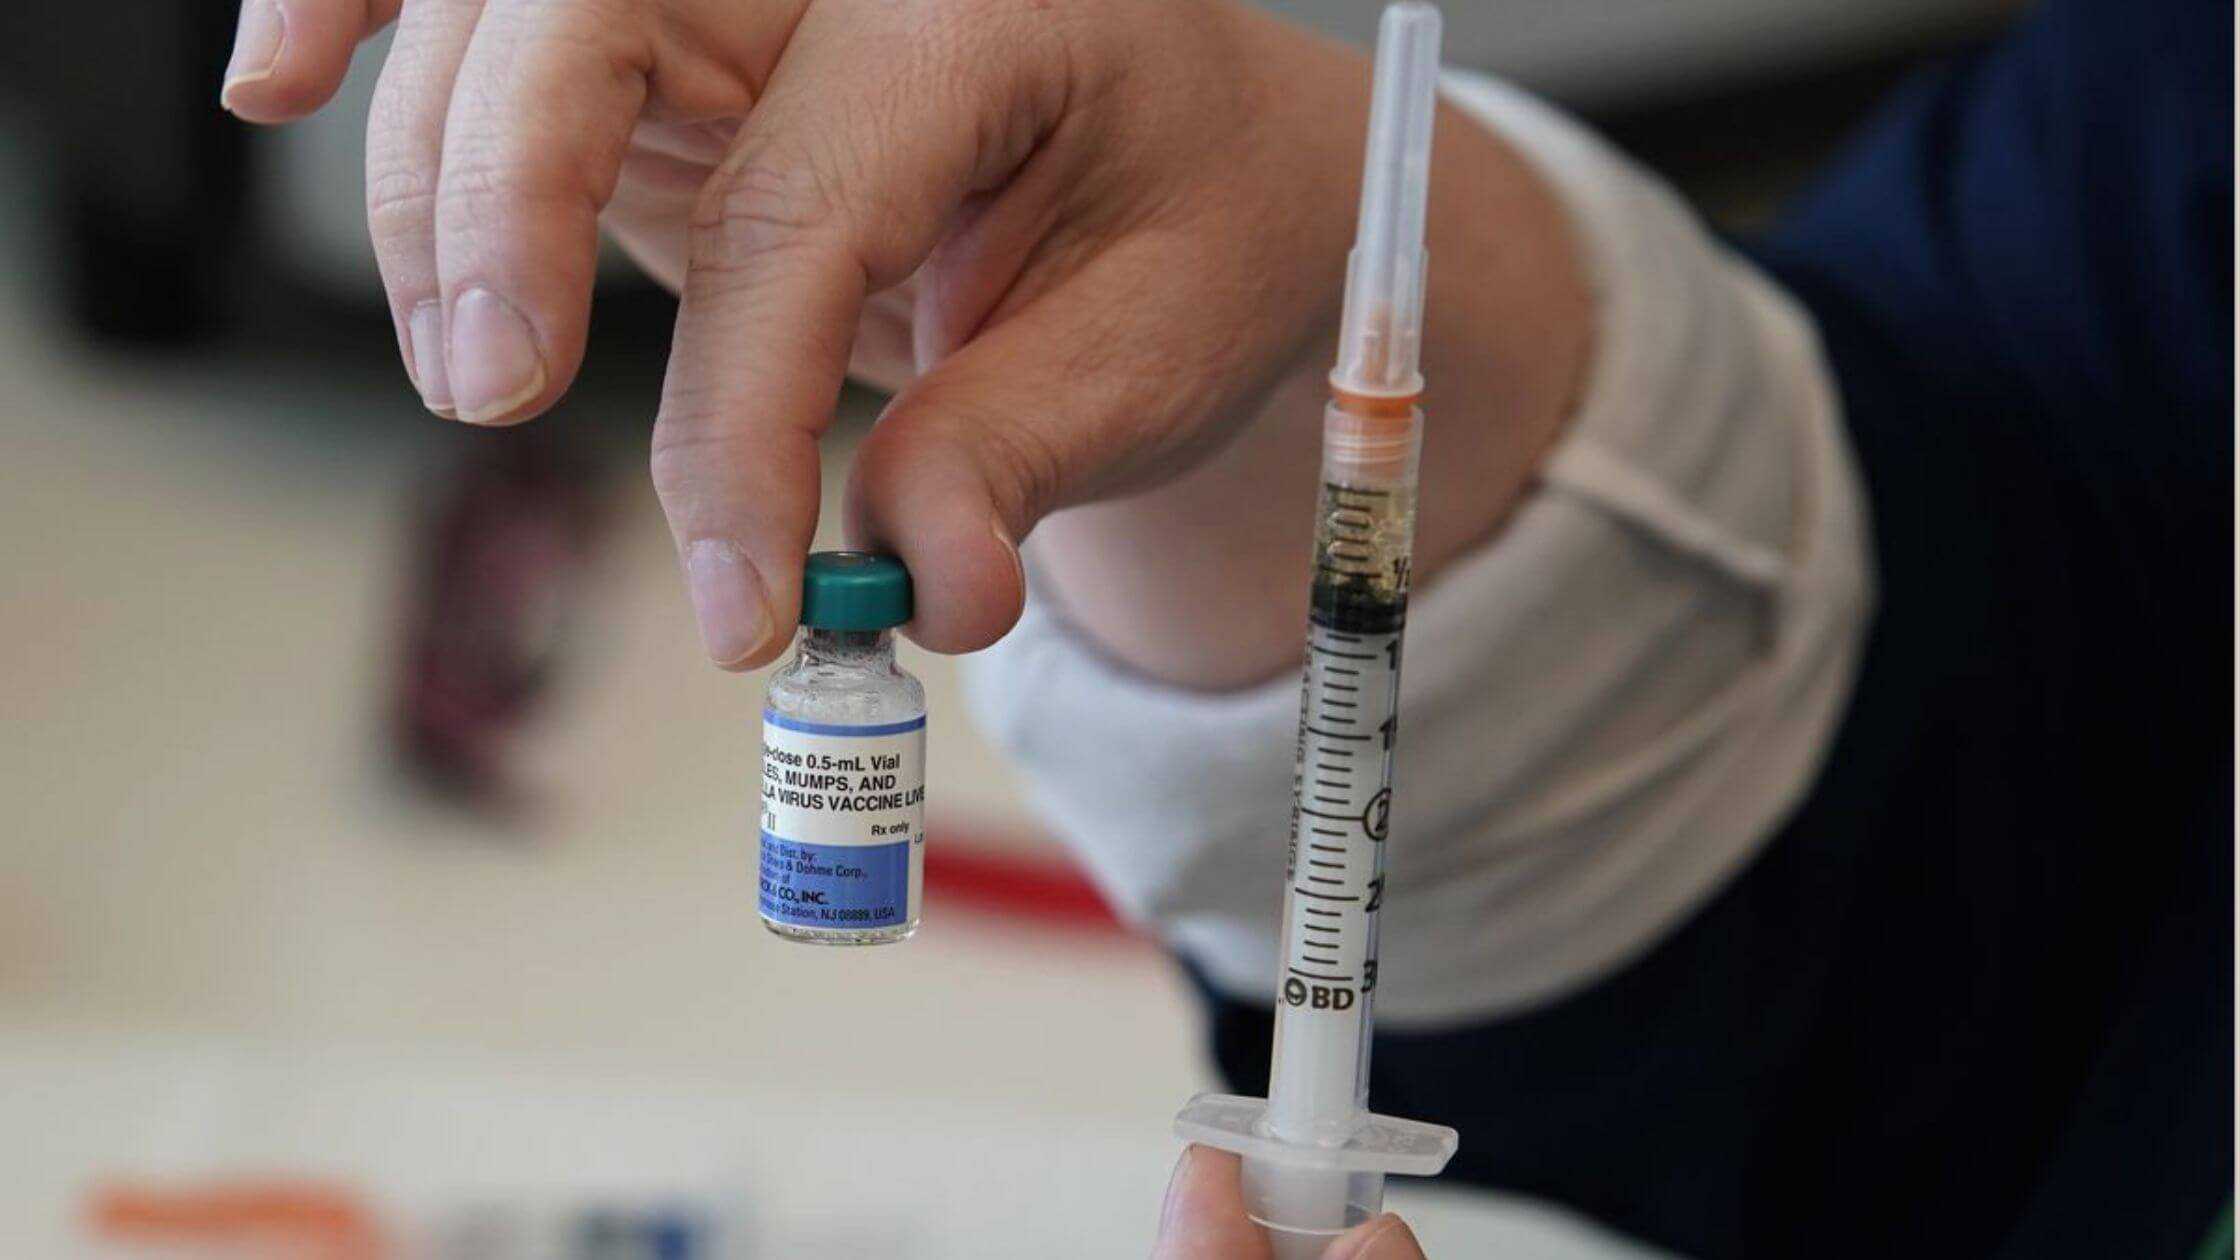 Vaccination Is Encouraged In Maricopa County After 3 Cases Of Measles Are Confirmed